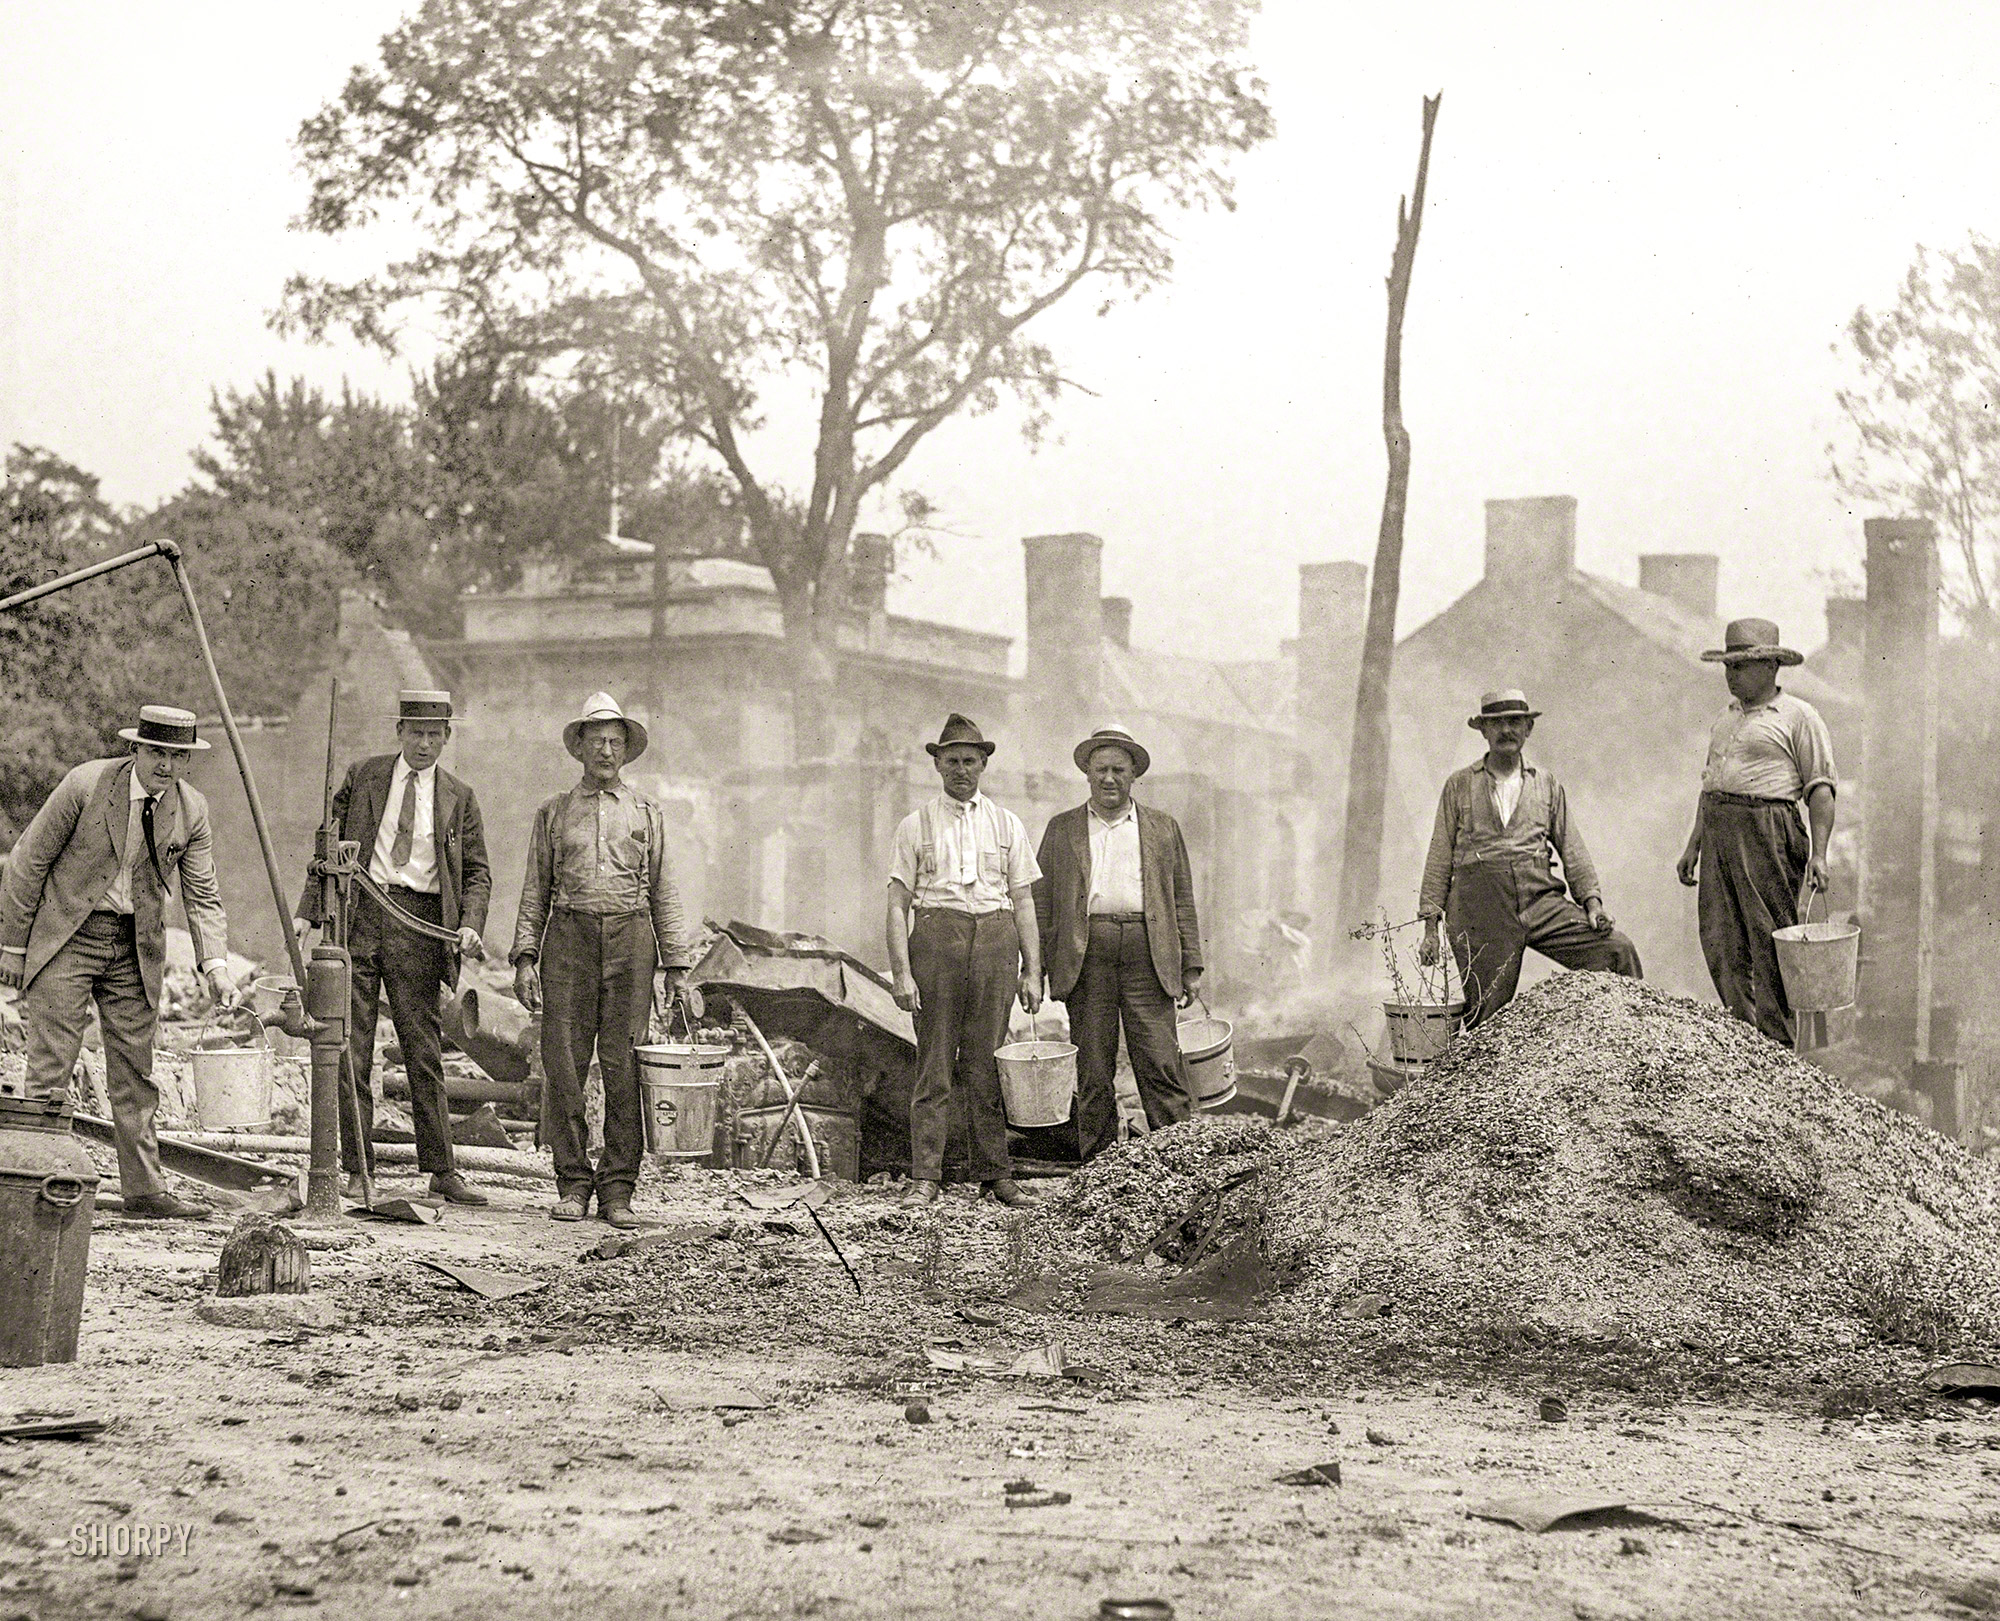 August 1923. Washington, D.C. "Dump story." The past is a bucket of ashes. Or a pail of water. National Photo Company Collection glass negative. View full size.